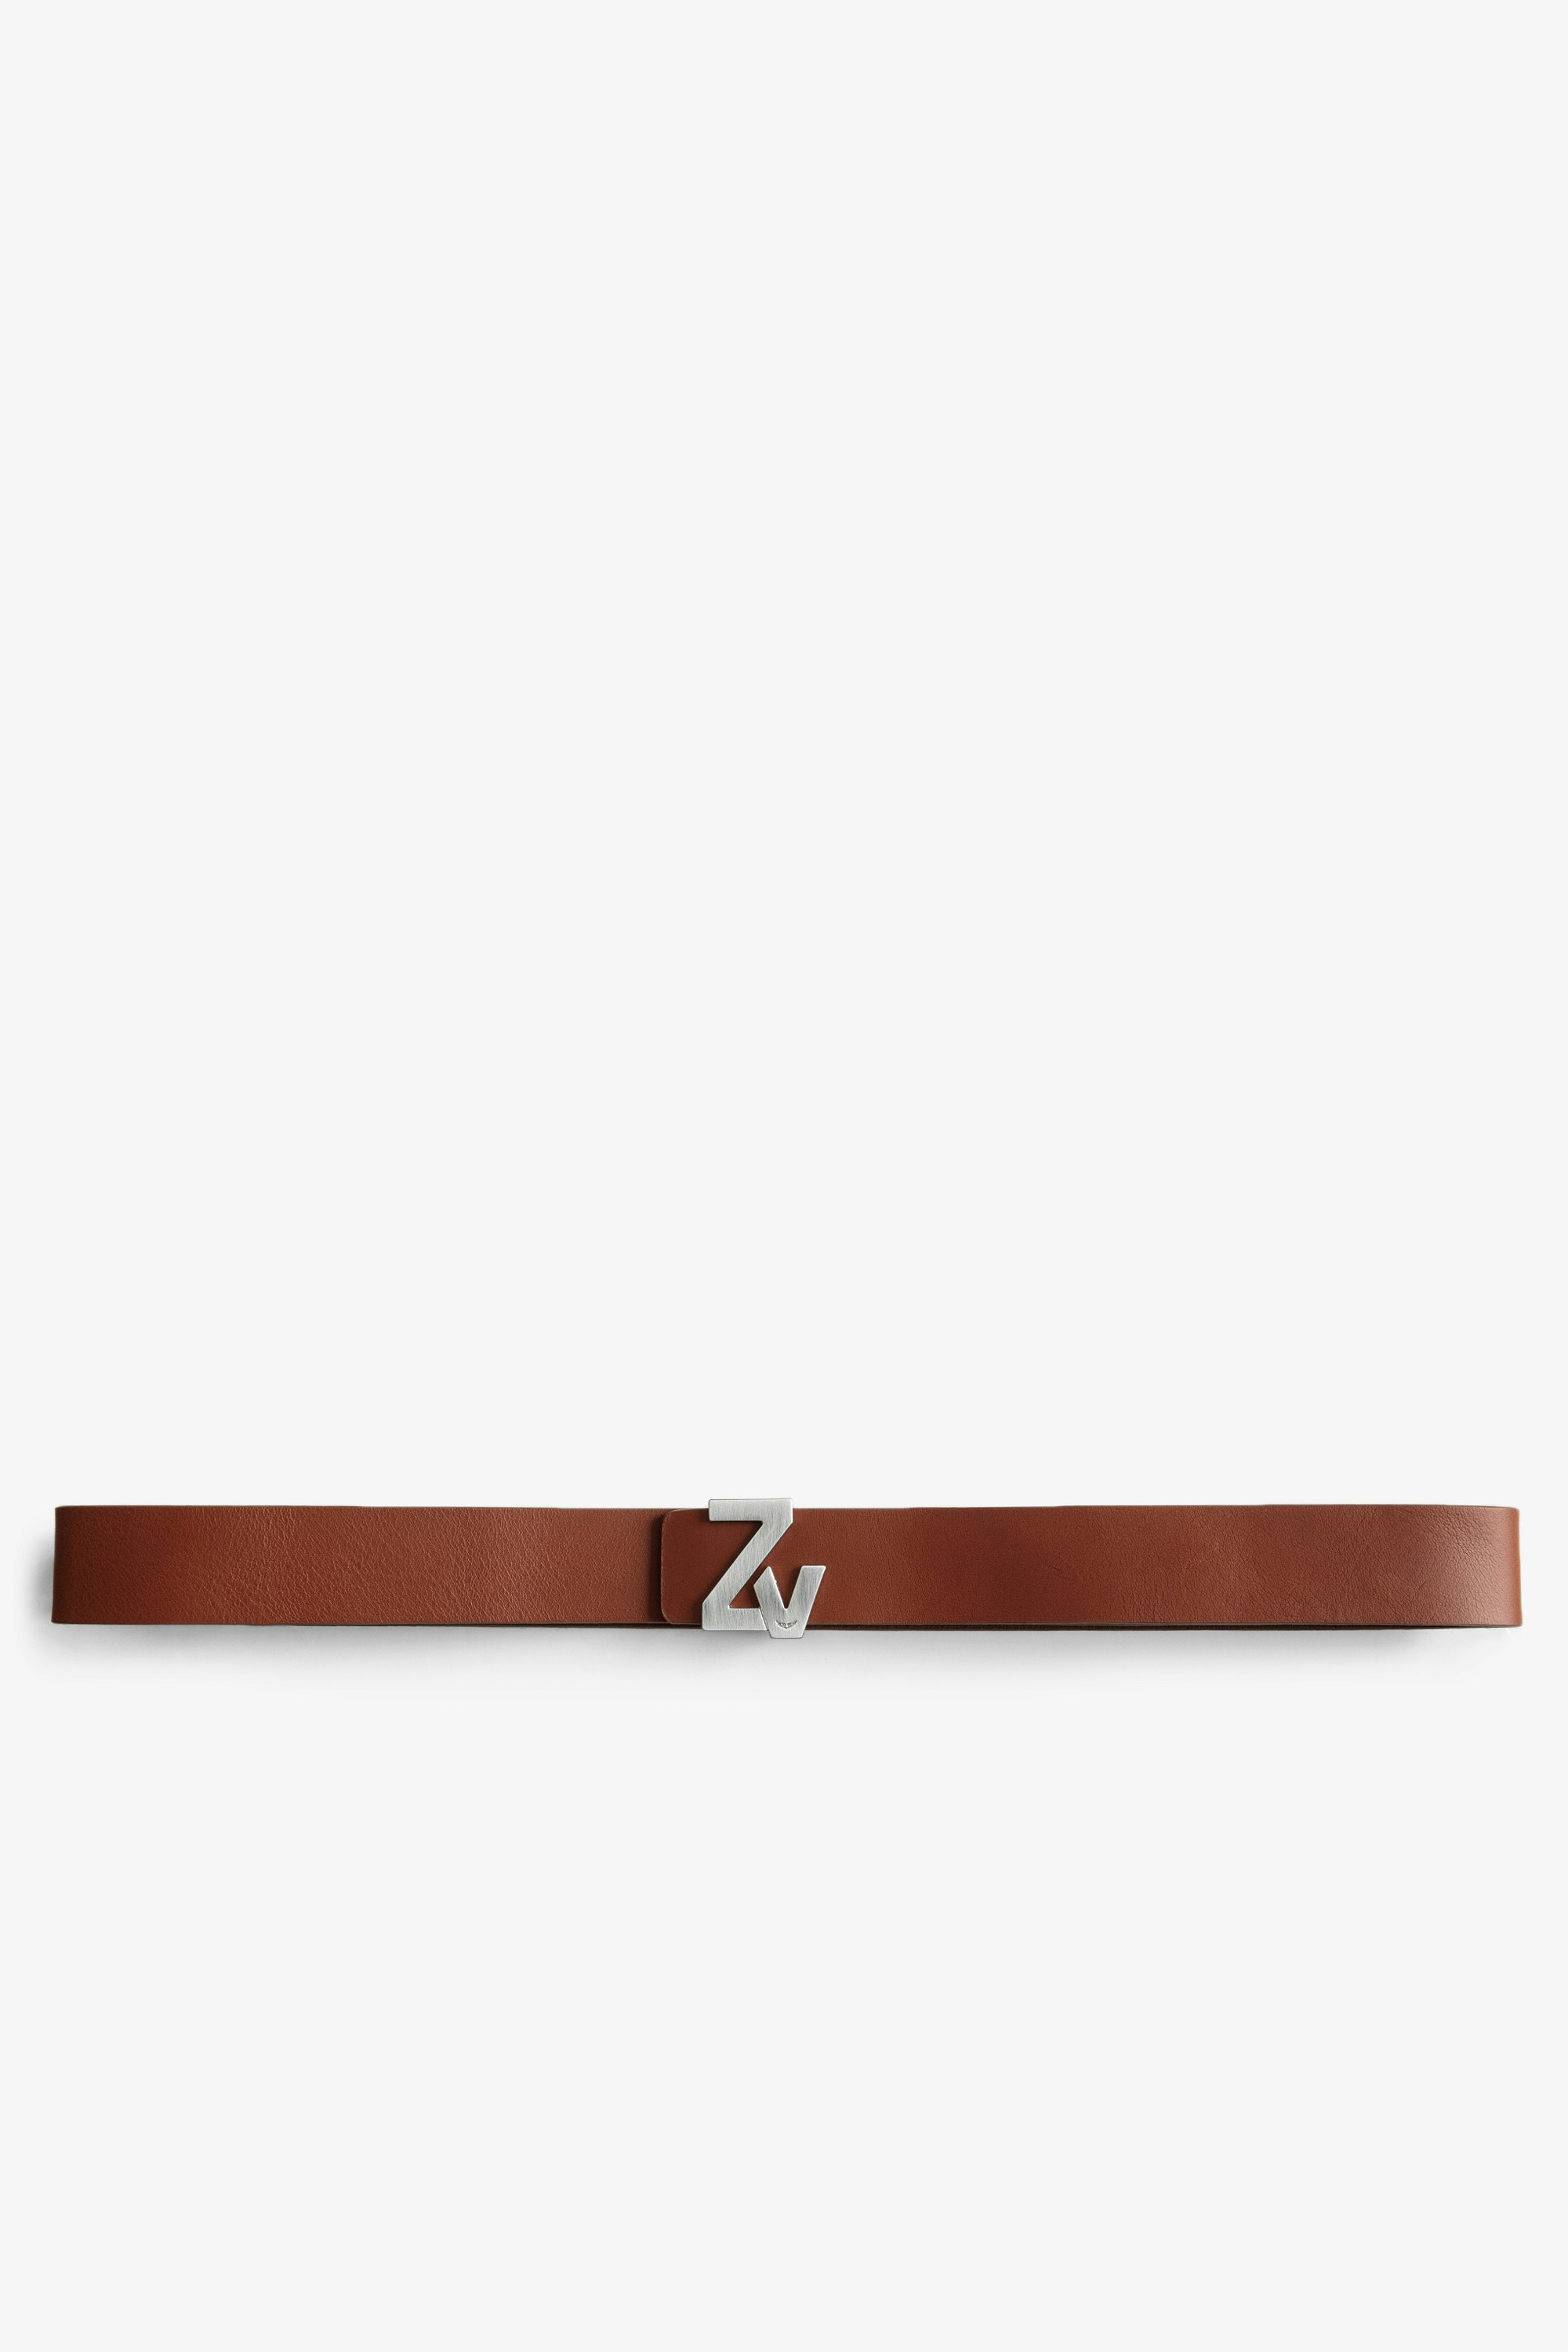 ZV Initiale La Belt Women's camel-colored leather belt with gold ZV buckle